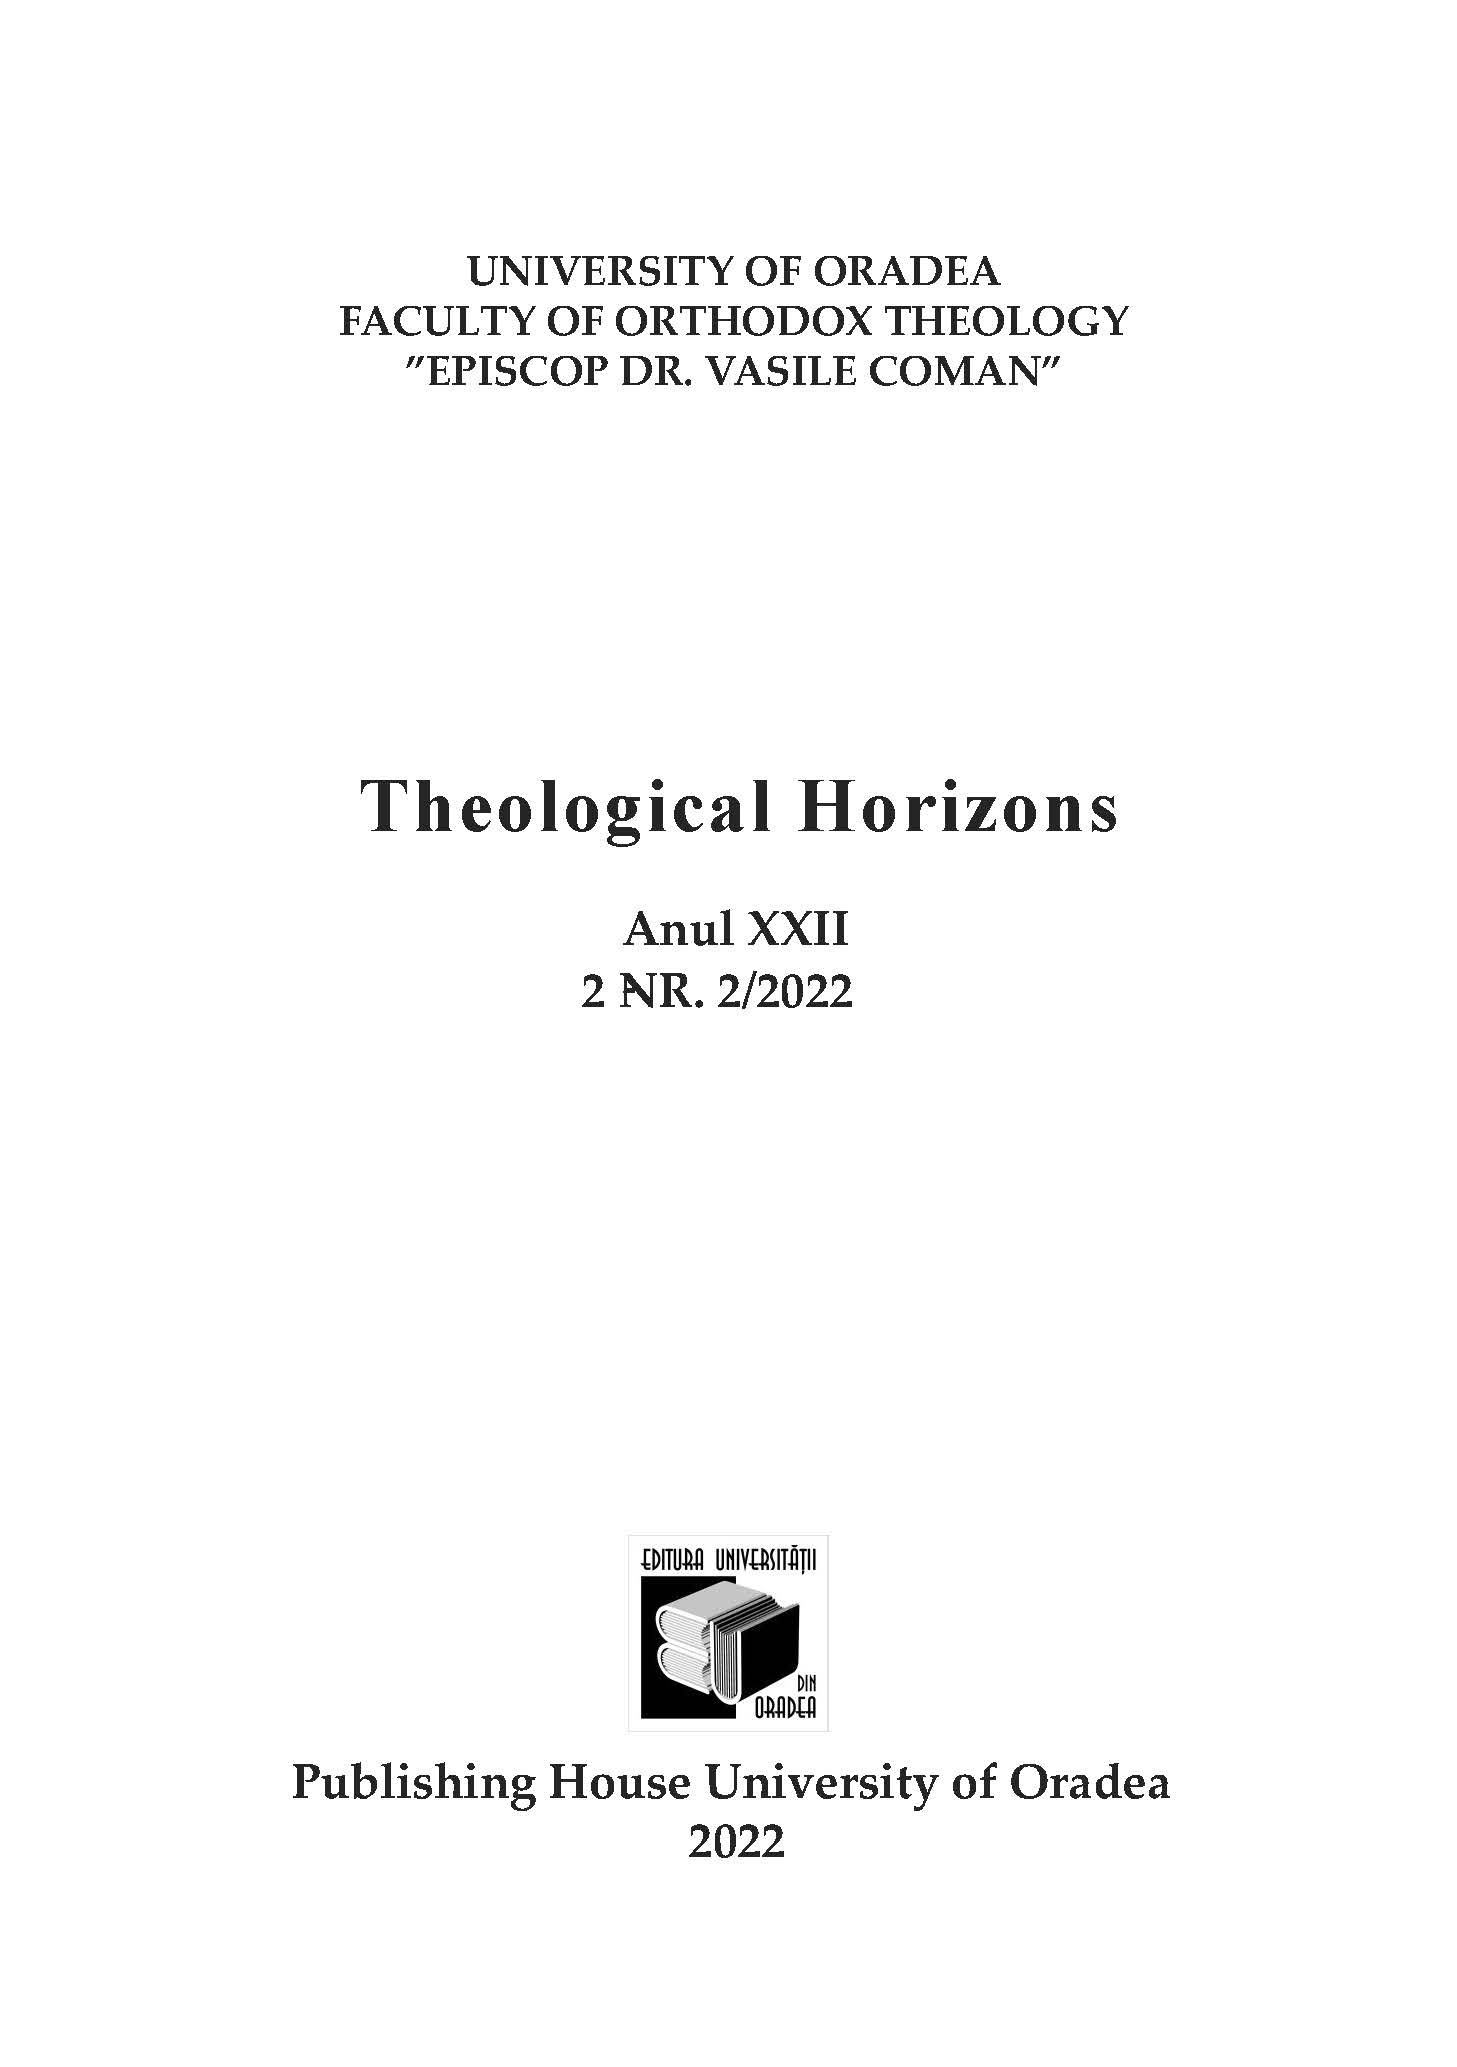 The reign of Alexandru Ioan Cuza and his reforming work in relation to religious life in the Romanian Orthodox Church